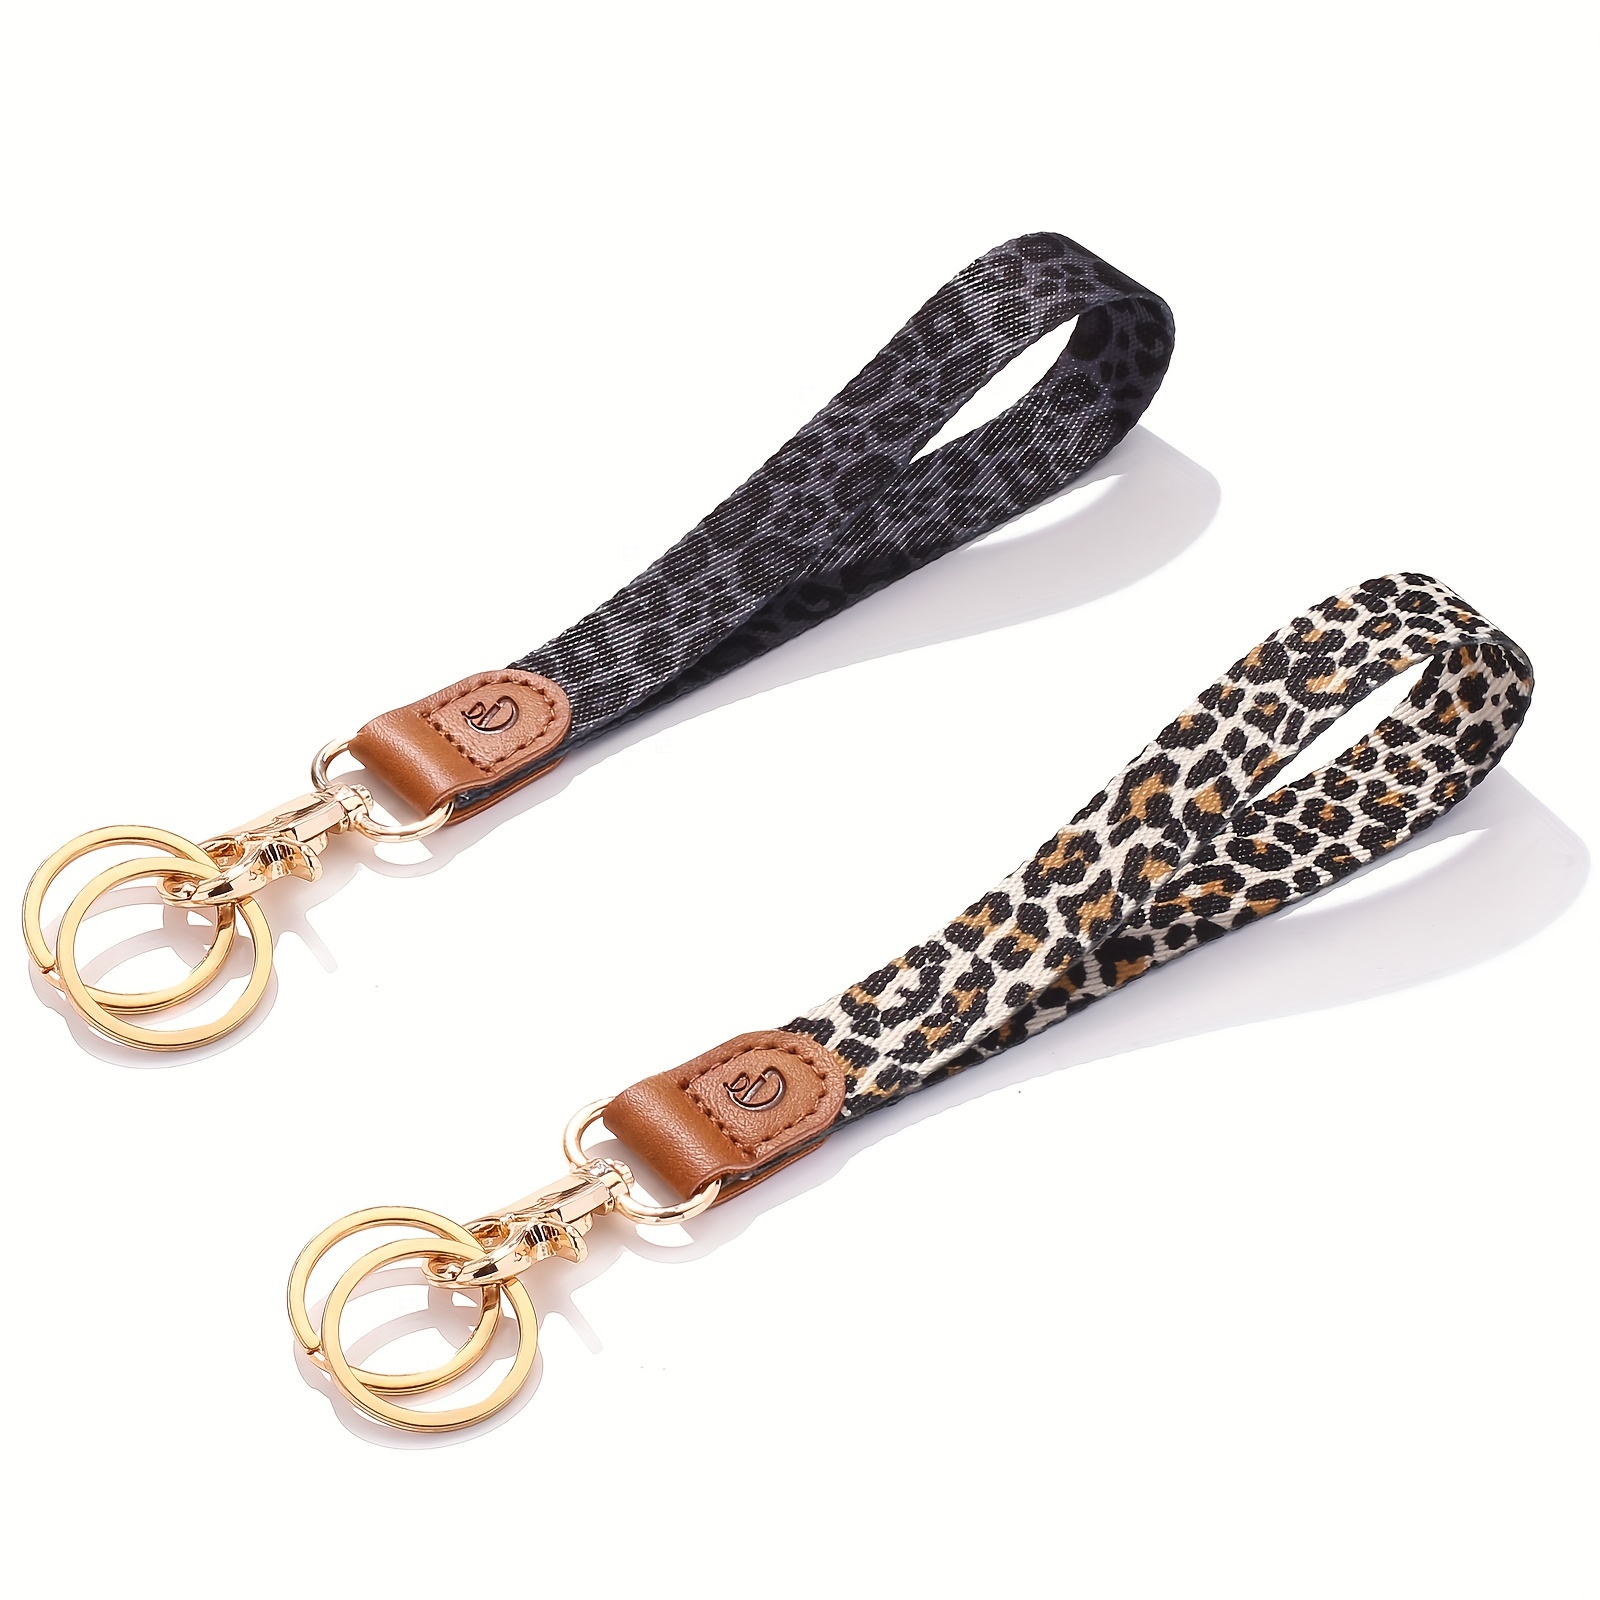 Wrist and Neck Lanyards for ID Badge Keys for Women Kids Teacher, 2 Pack  Short and Long Cute Car Key Neck Lanyards with 2 Keychain & Lanyard